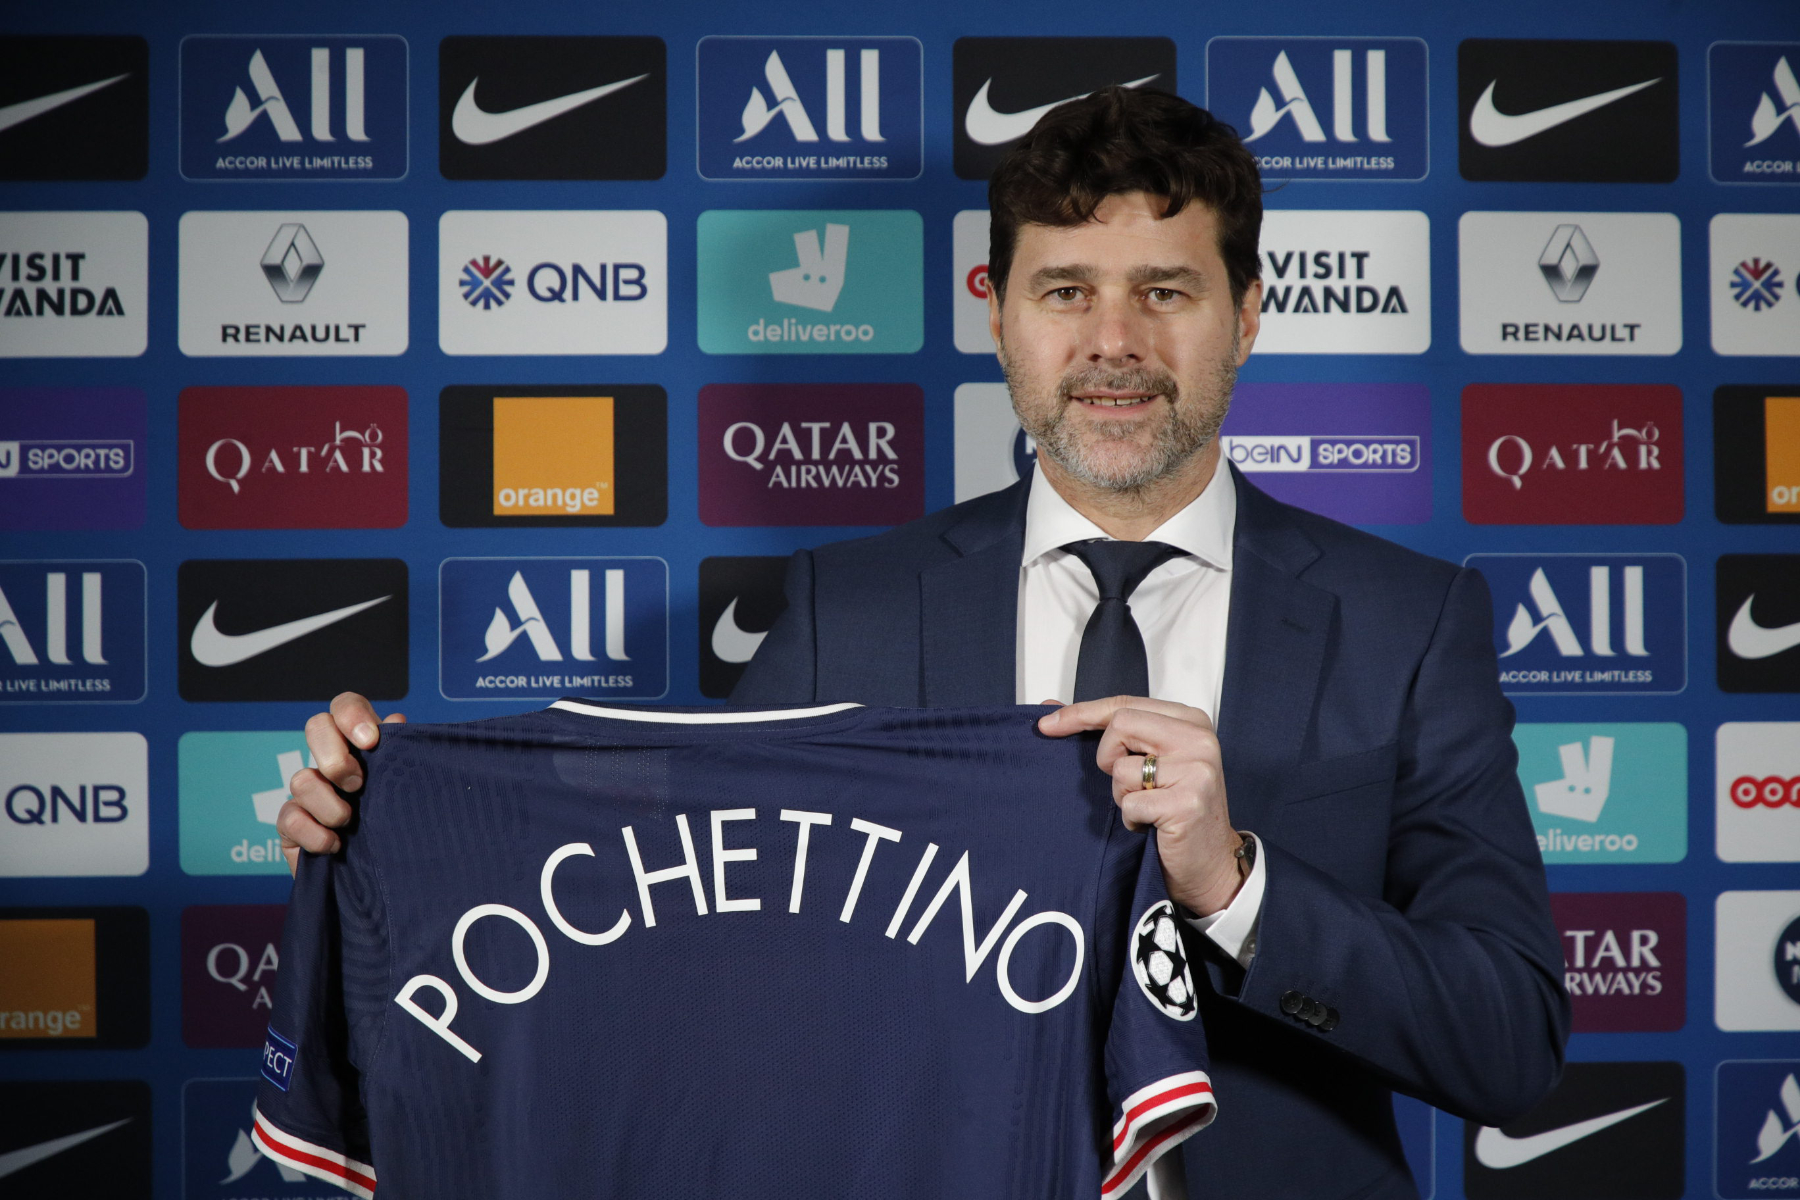 PSG Wish List: What Supporters Expect From Pochettino - PSG Talk